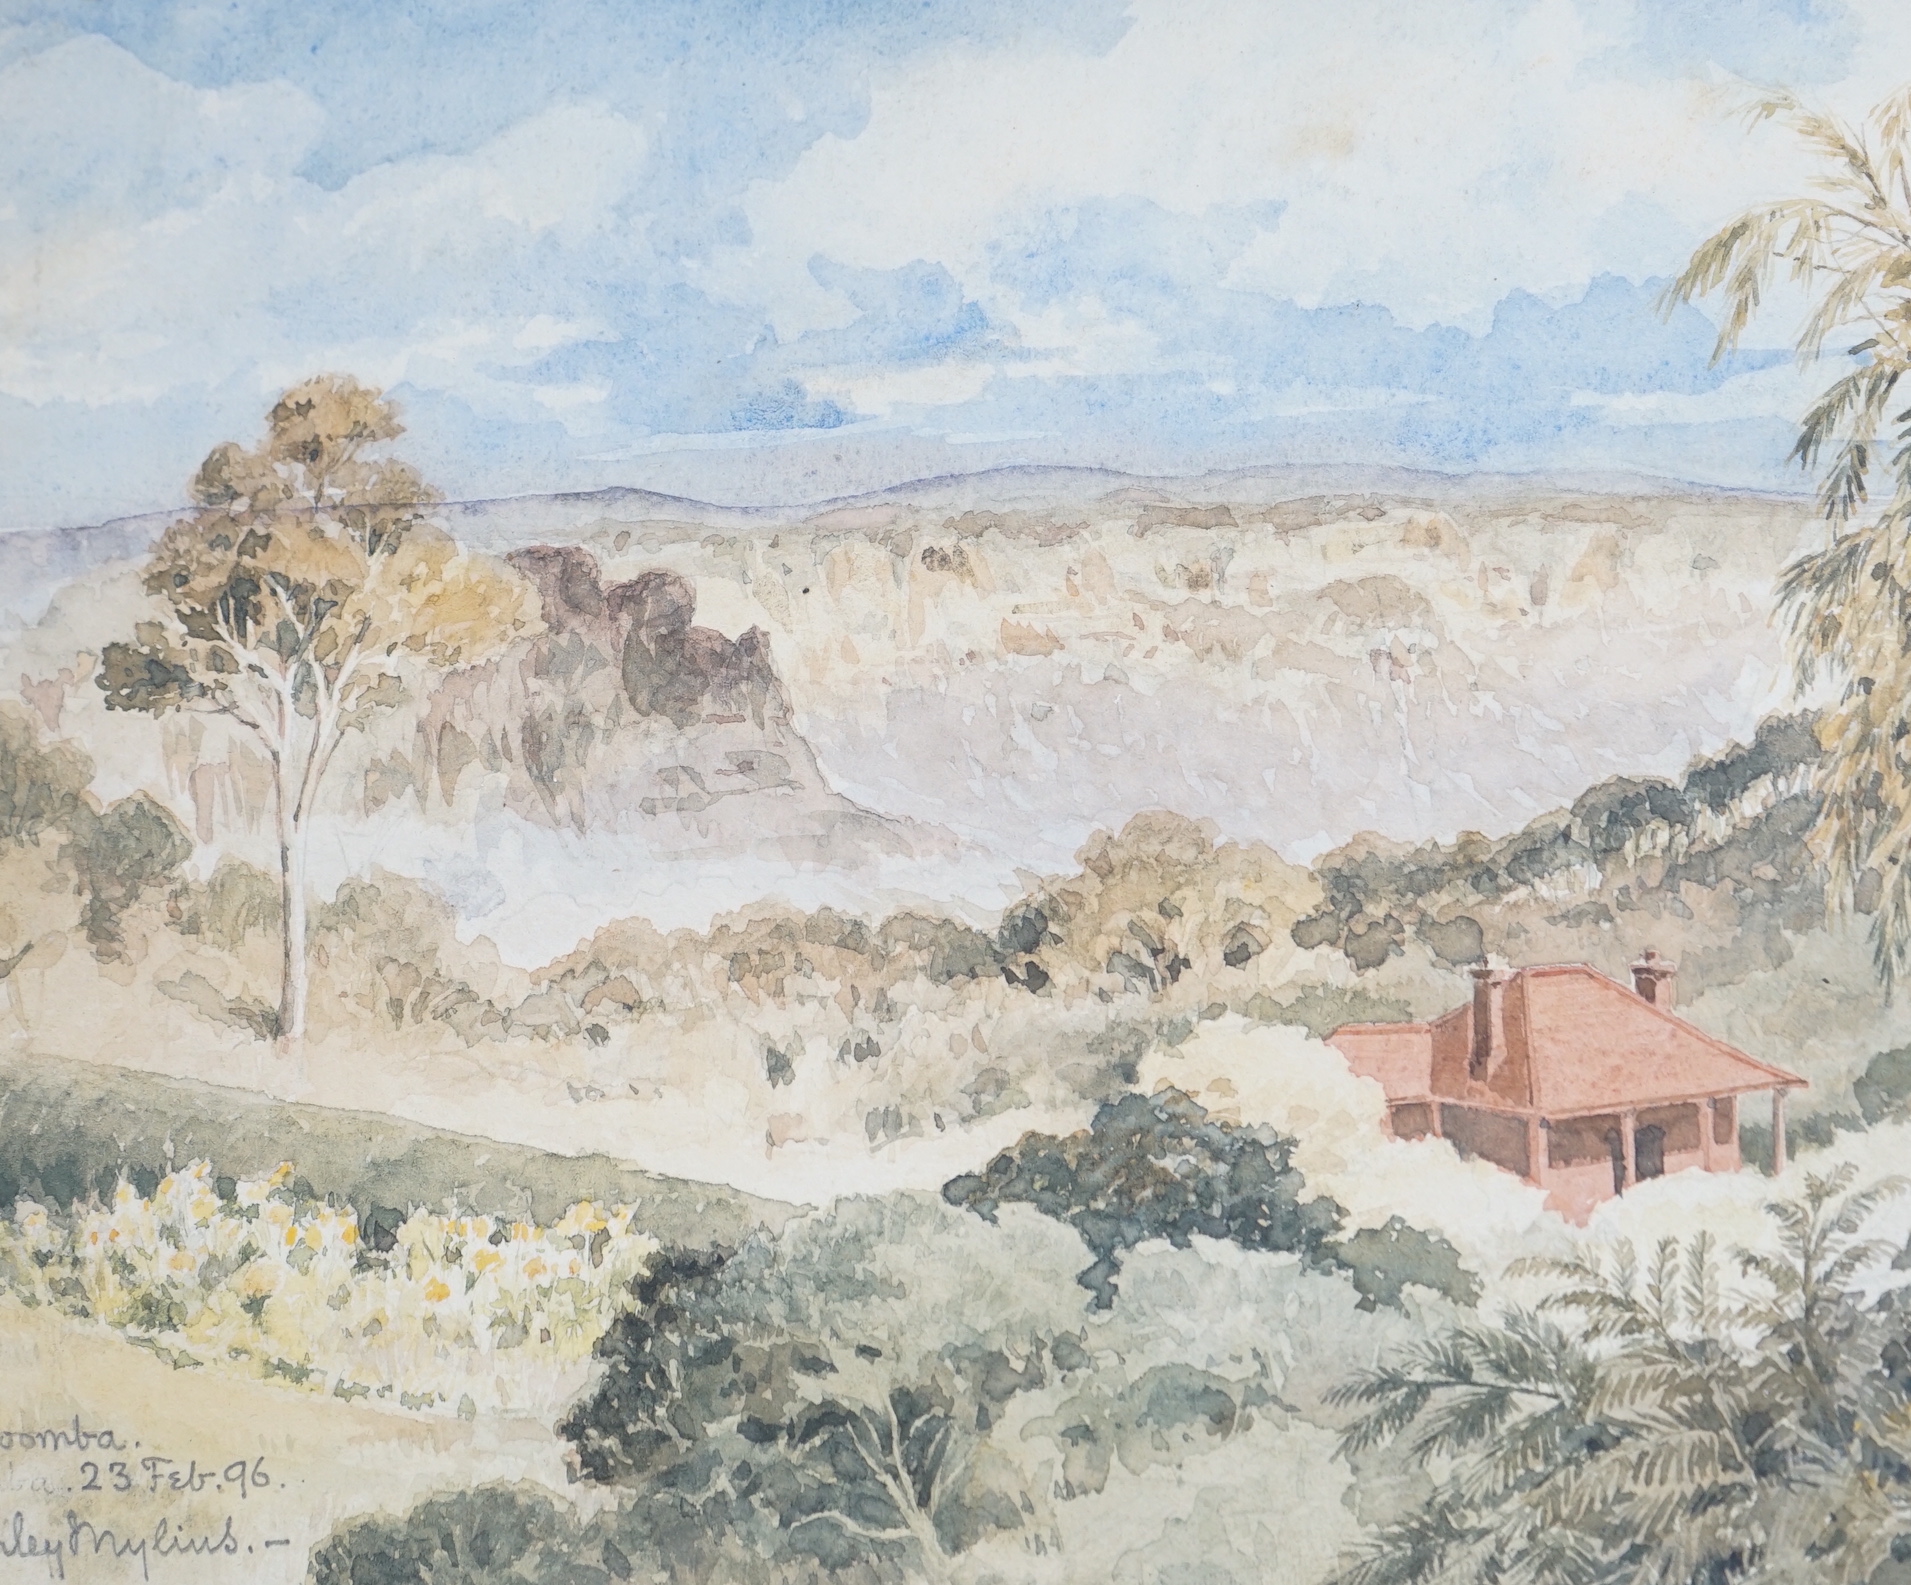 Stanley Mylius (19th/20th century), three watercolours, Australian landscapes, including Katoomba, each signed and dated, largest 29 x 45cm